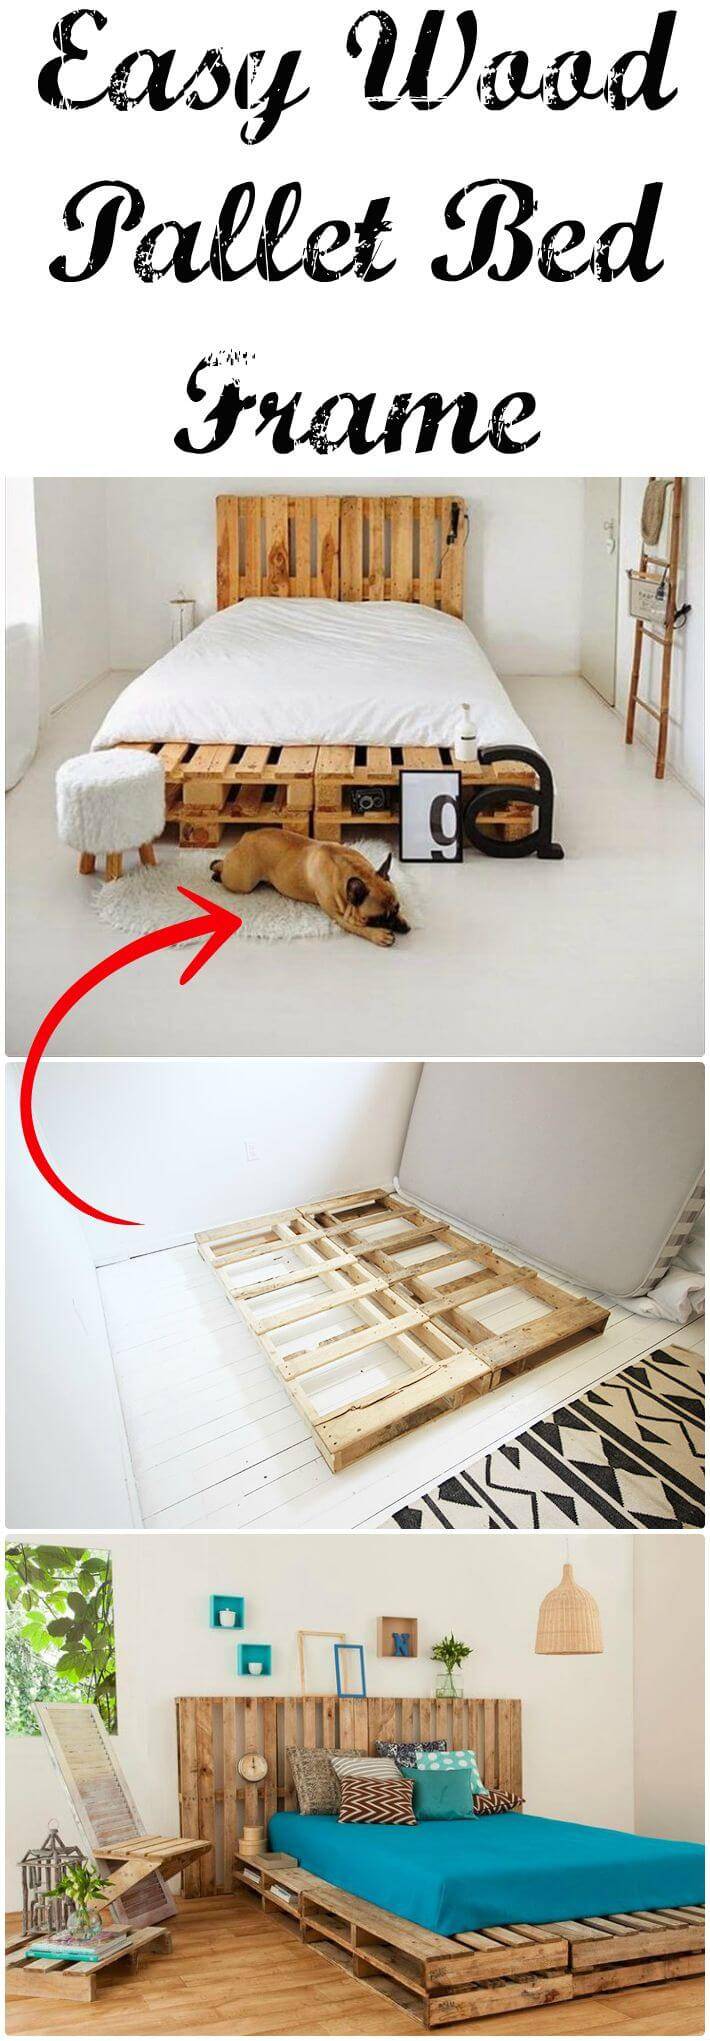 11 Diy Pallet Bed Frame Ideas With Step By Step Plans - Diy Crafts